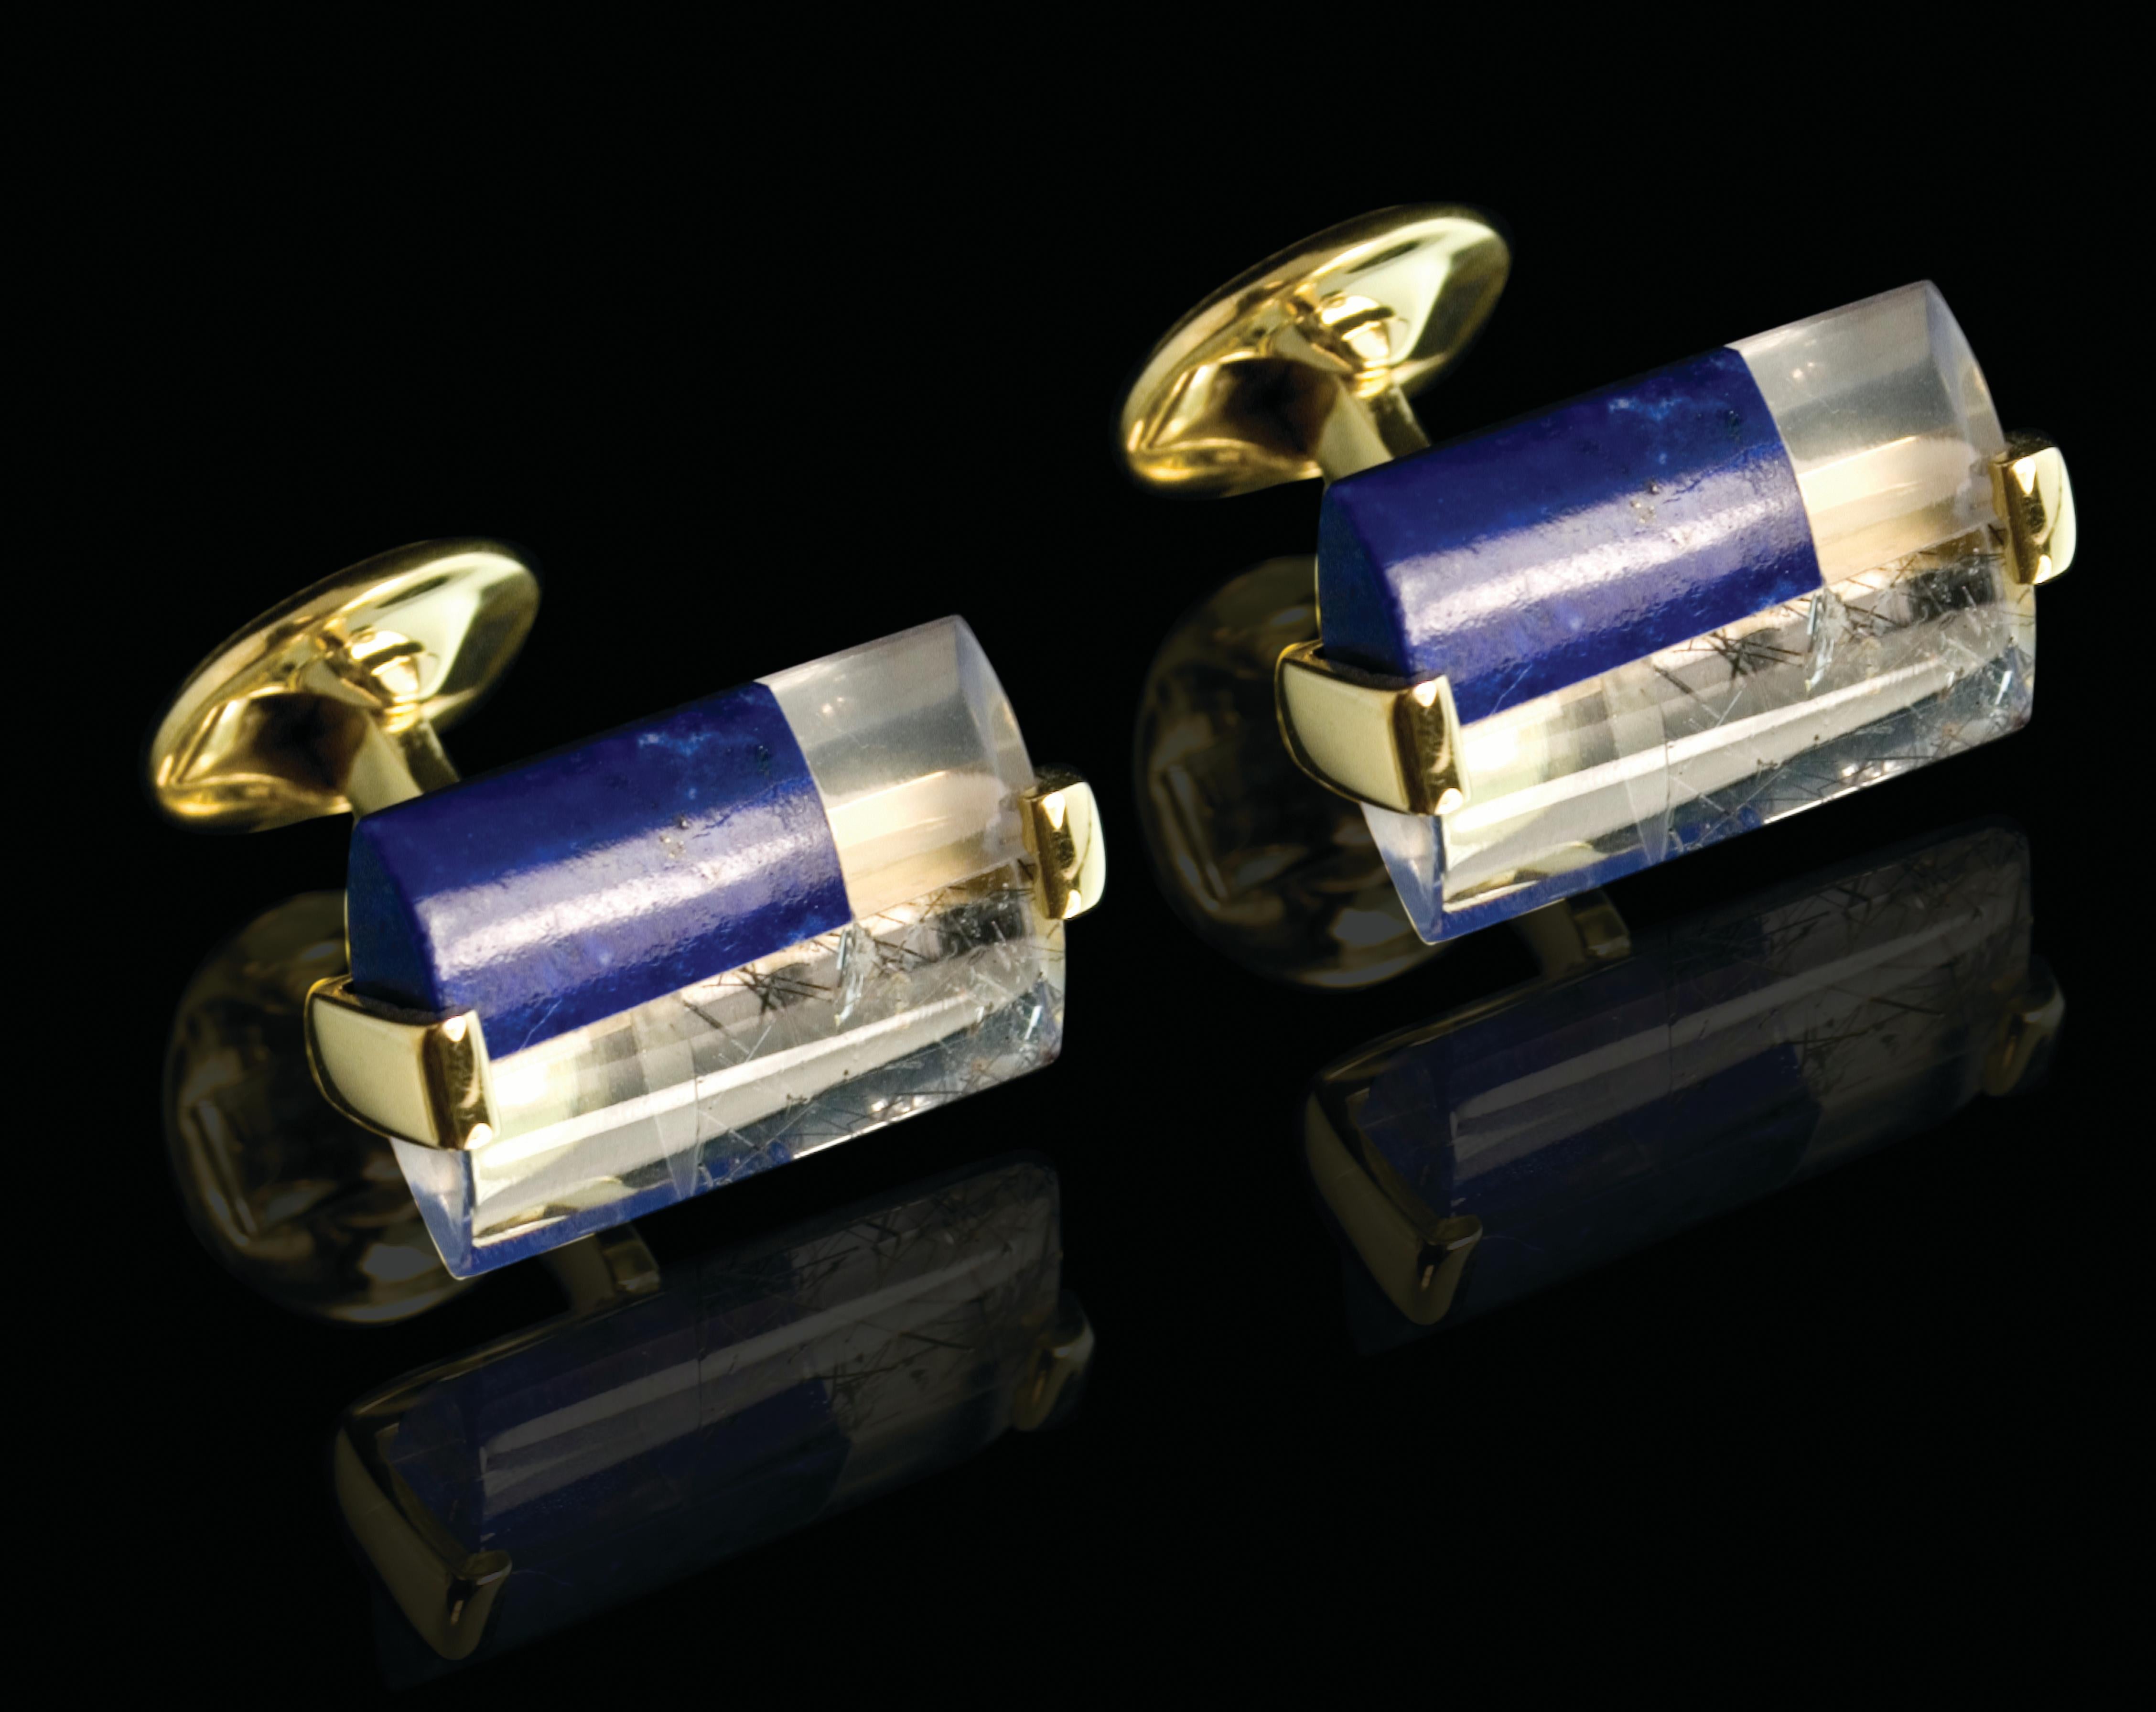 A unique pair of cufflinks with subtle beauty. The true beauty of each stone can be appreciated from all angles with this subtle case designed to securely hold the stone. This collection explores natural stones with rough jagged edges, and hand cut